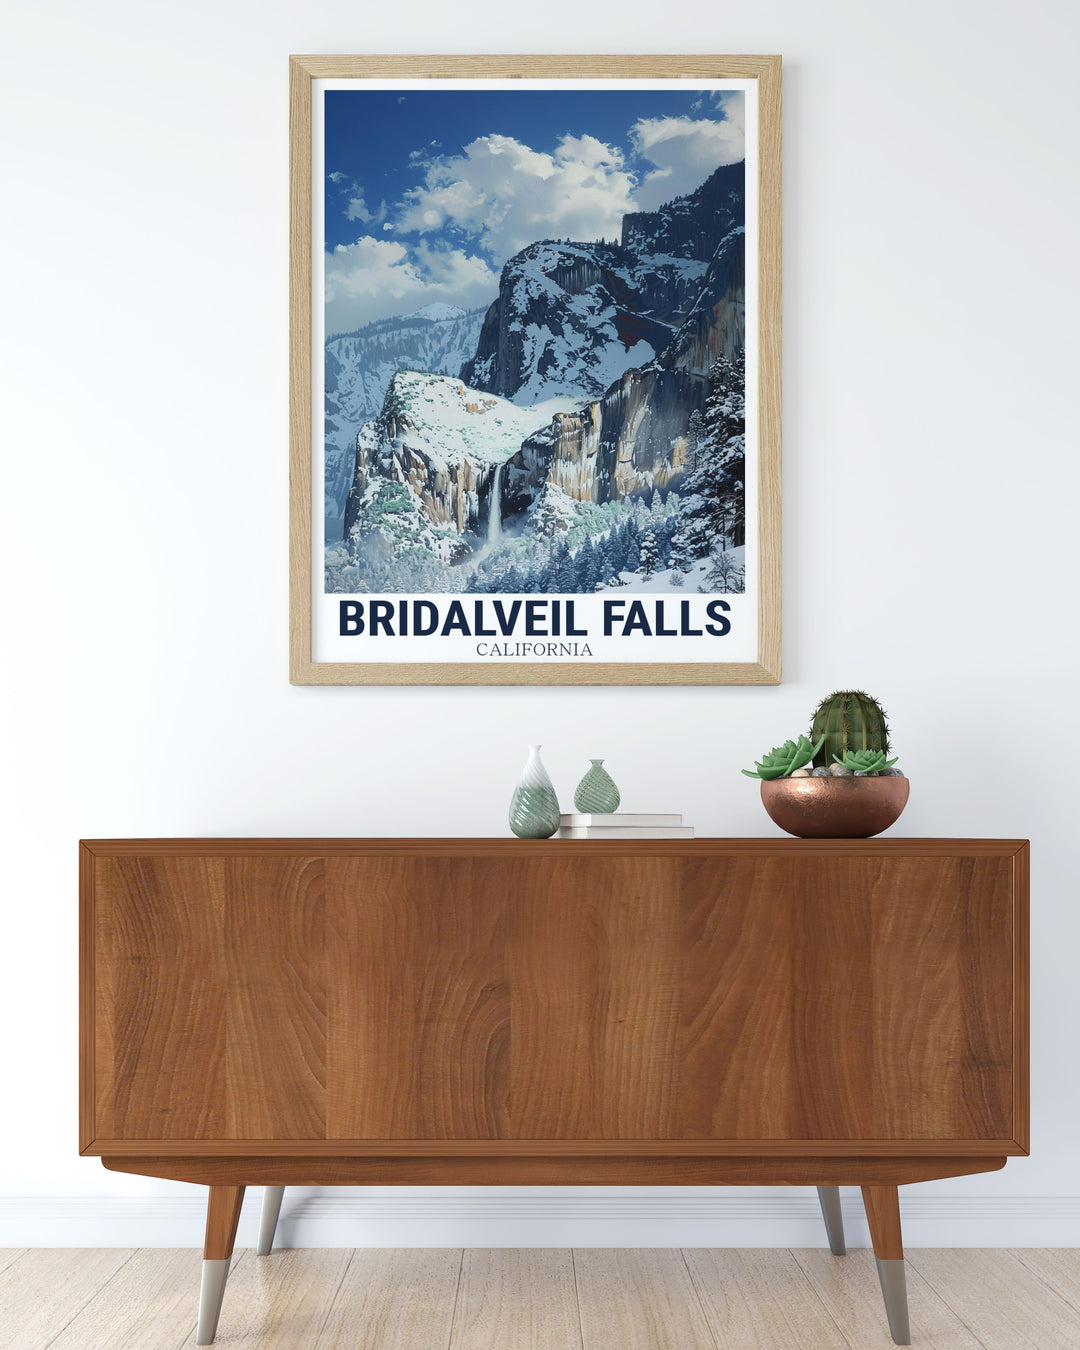 Scenic View from winter Bridalveil Falls print perfect for enhancing your California decor collection. This California travel artwork captures the beauty of one of the state's most famous waterfalls making it a perfect addition to any home or office.